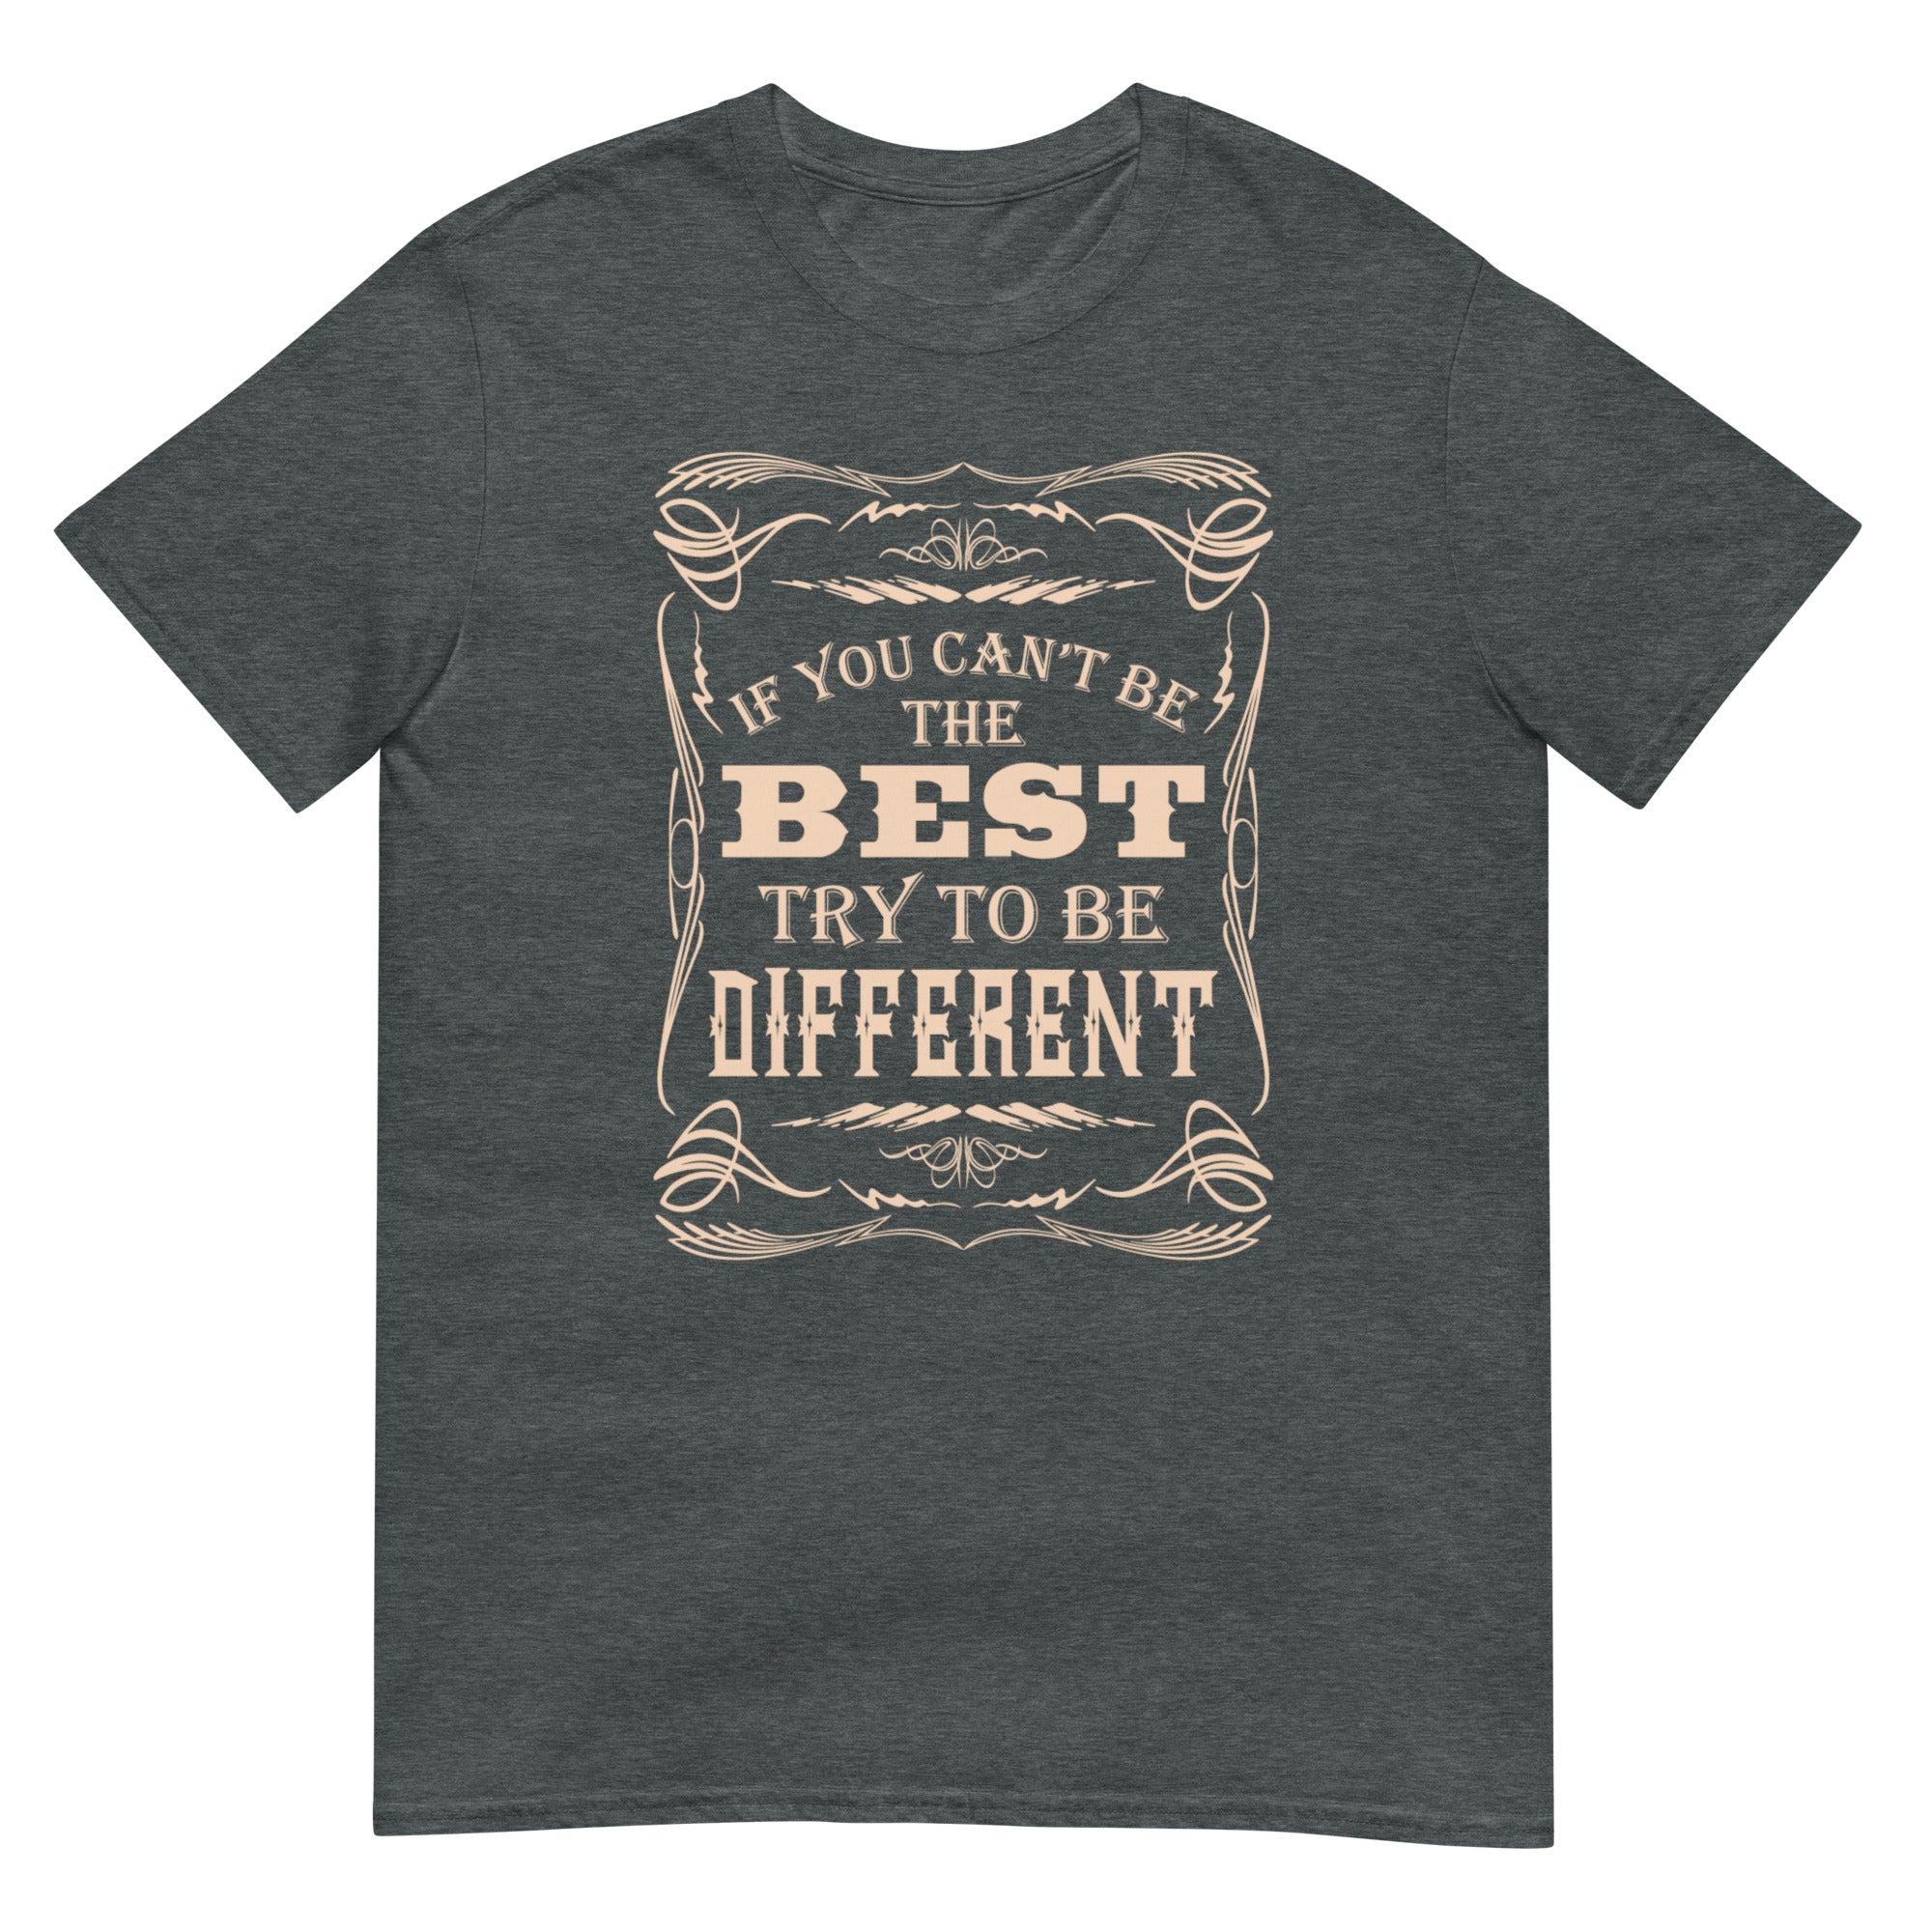 If You Can't Be The Best - Short-Sleeve Unisex T-Shirt